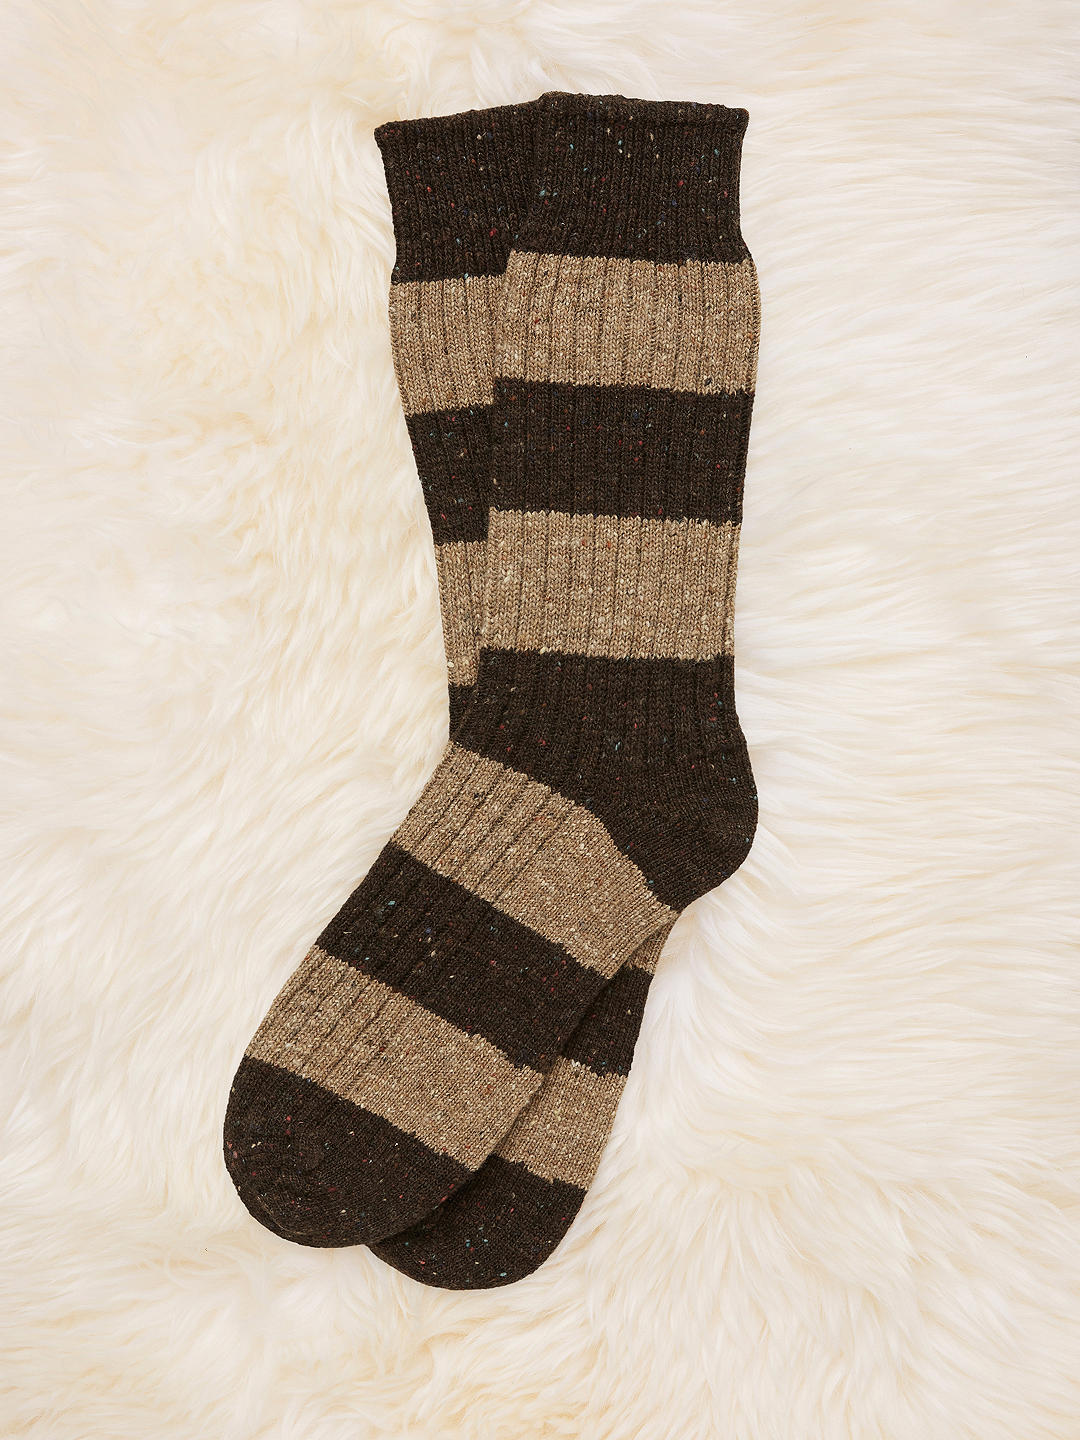 Celtic & Co. Donegal Merino, Silk and Cashmere Blend Striped Socks, Tanner Brown